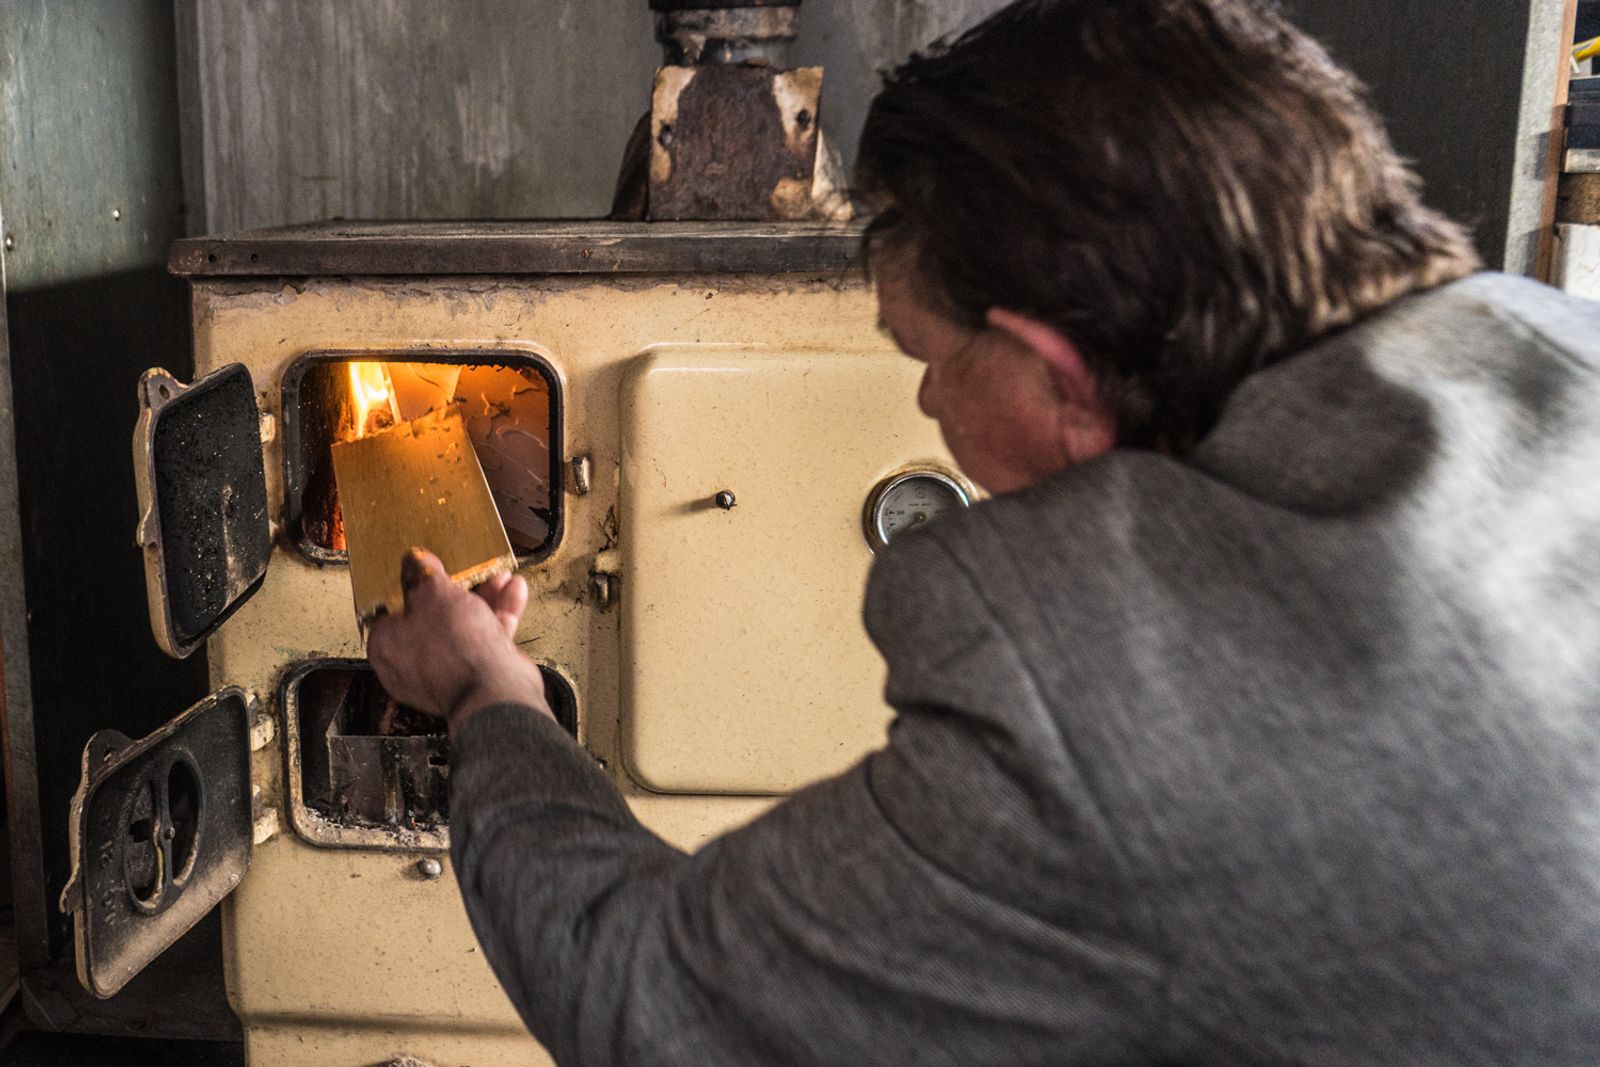 © Stephen Gerard Kelly - John (52) burns wood in a cast iron stove in his trailer for heat during the cold, wet Irish winter. 